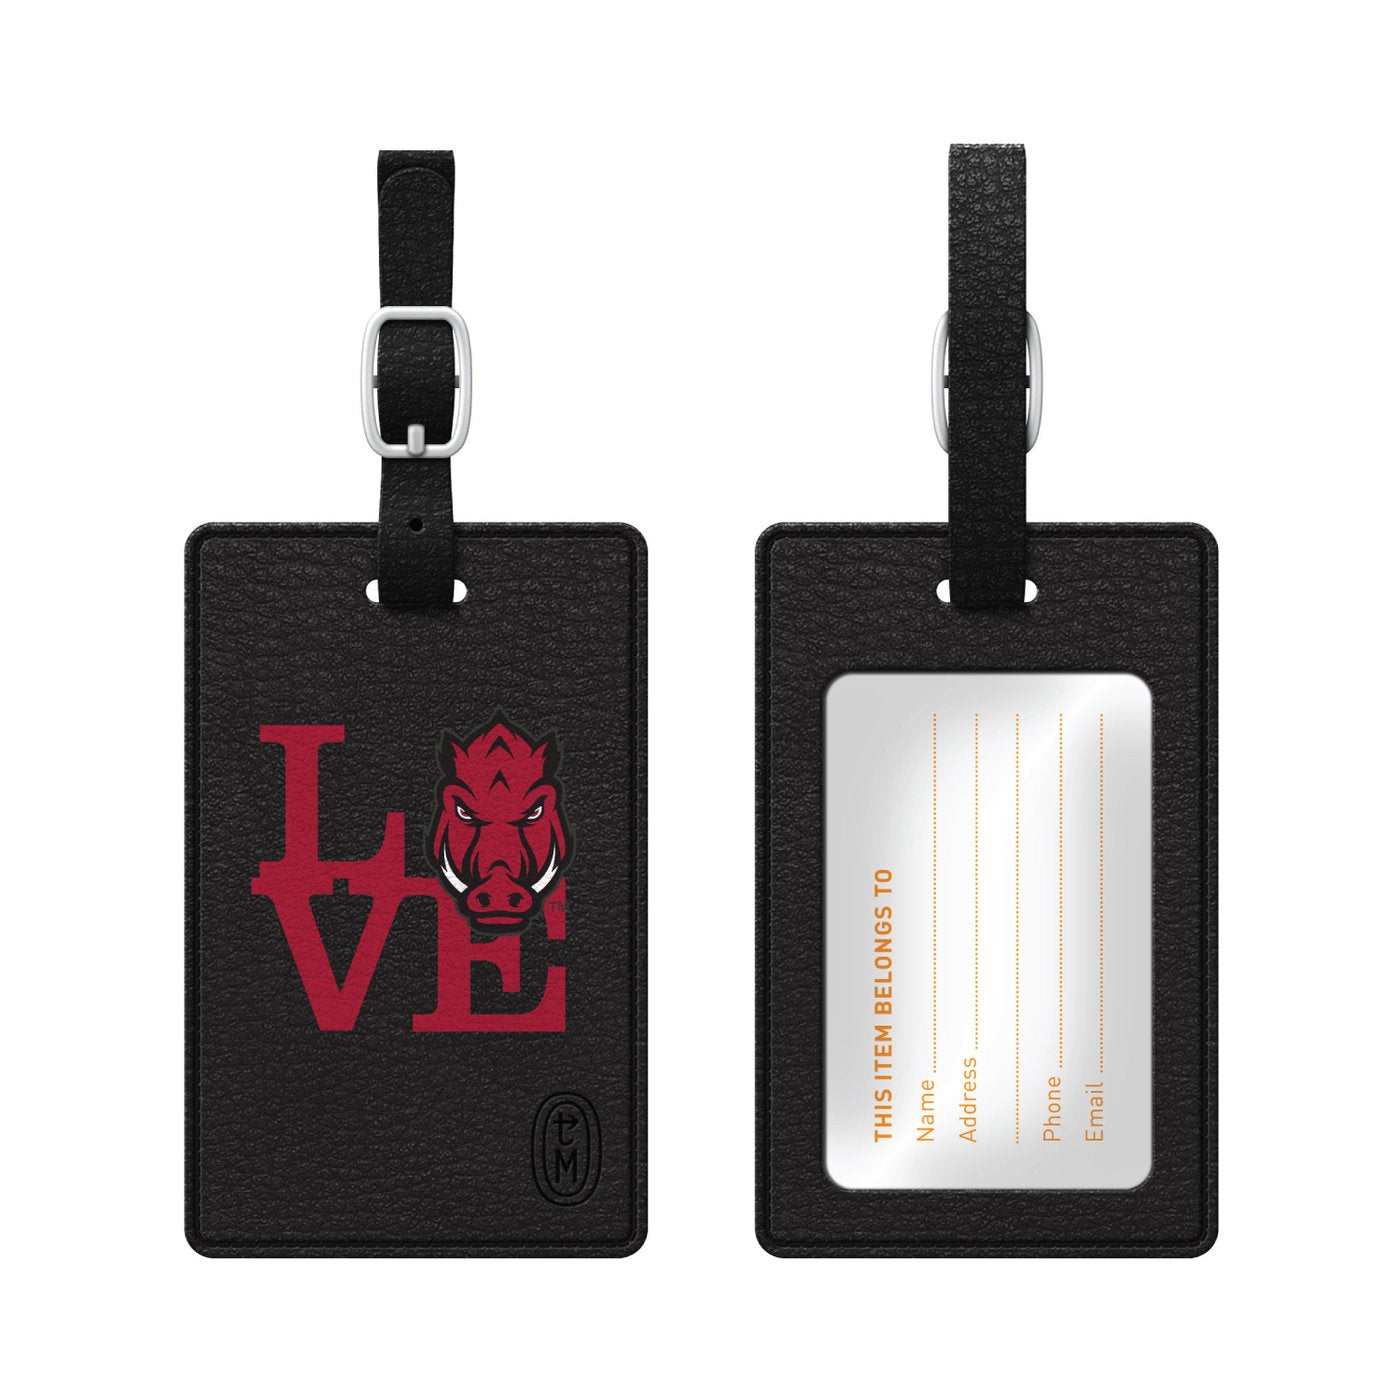 University of Arkansas - Fayetteville Faux Leather Luggage Tag, Love